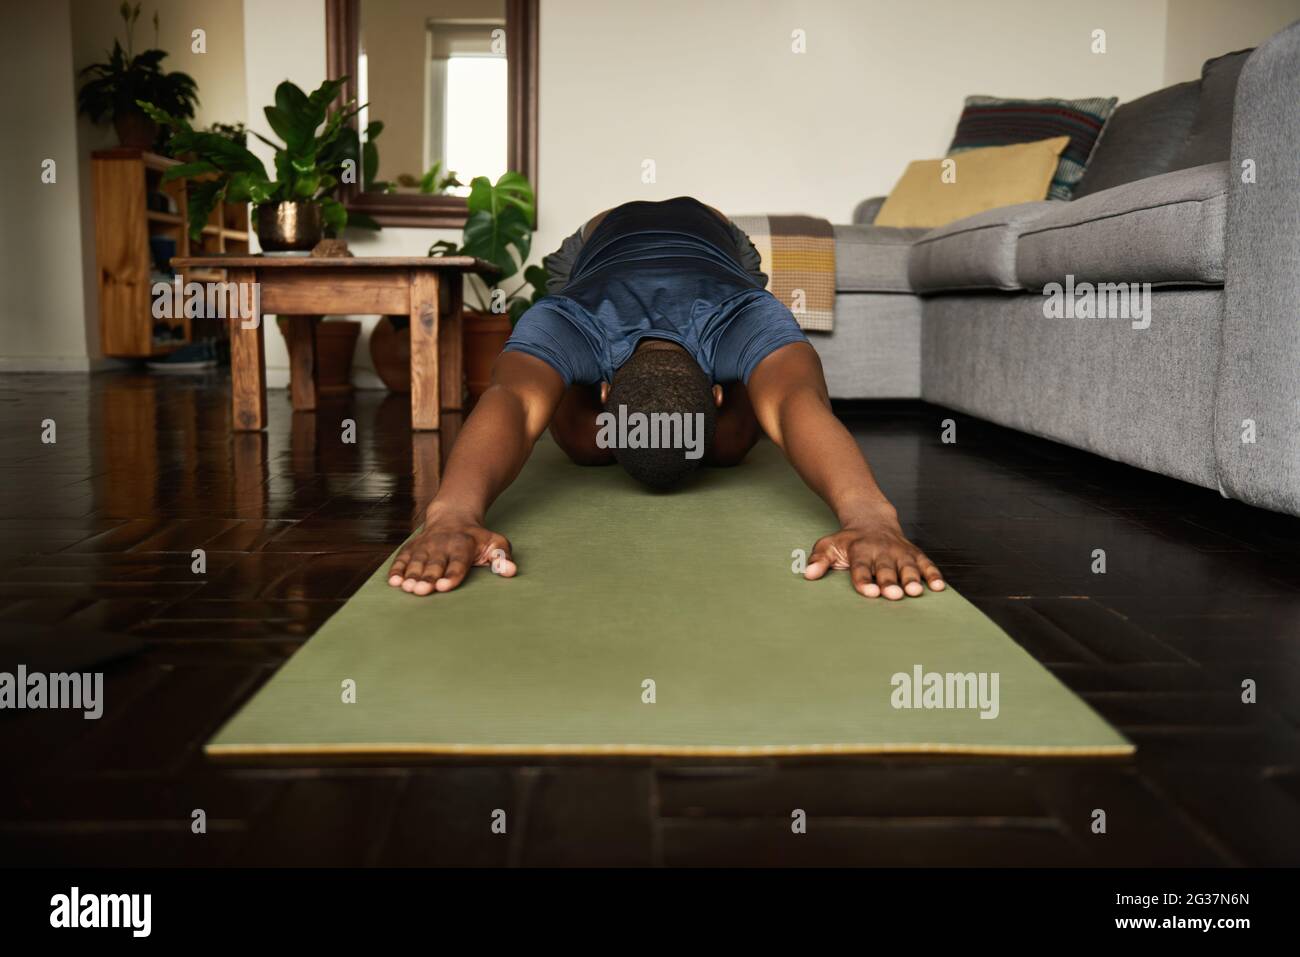 Young African man in the child's pose during yoga at home Stock Photo